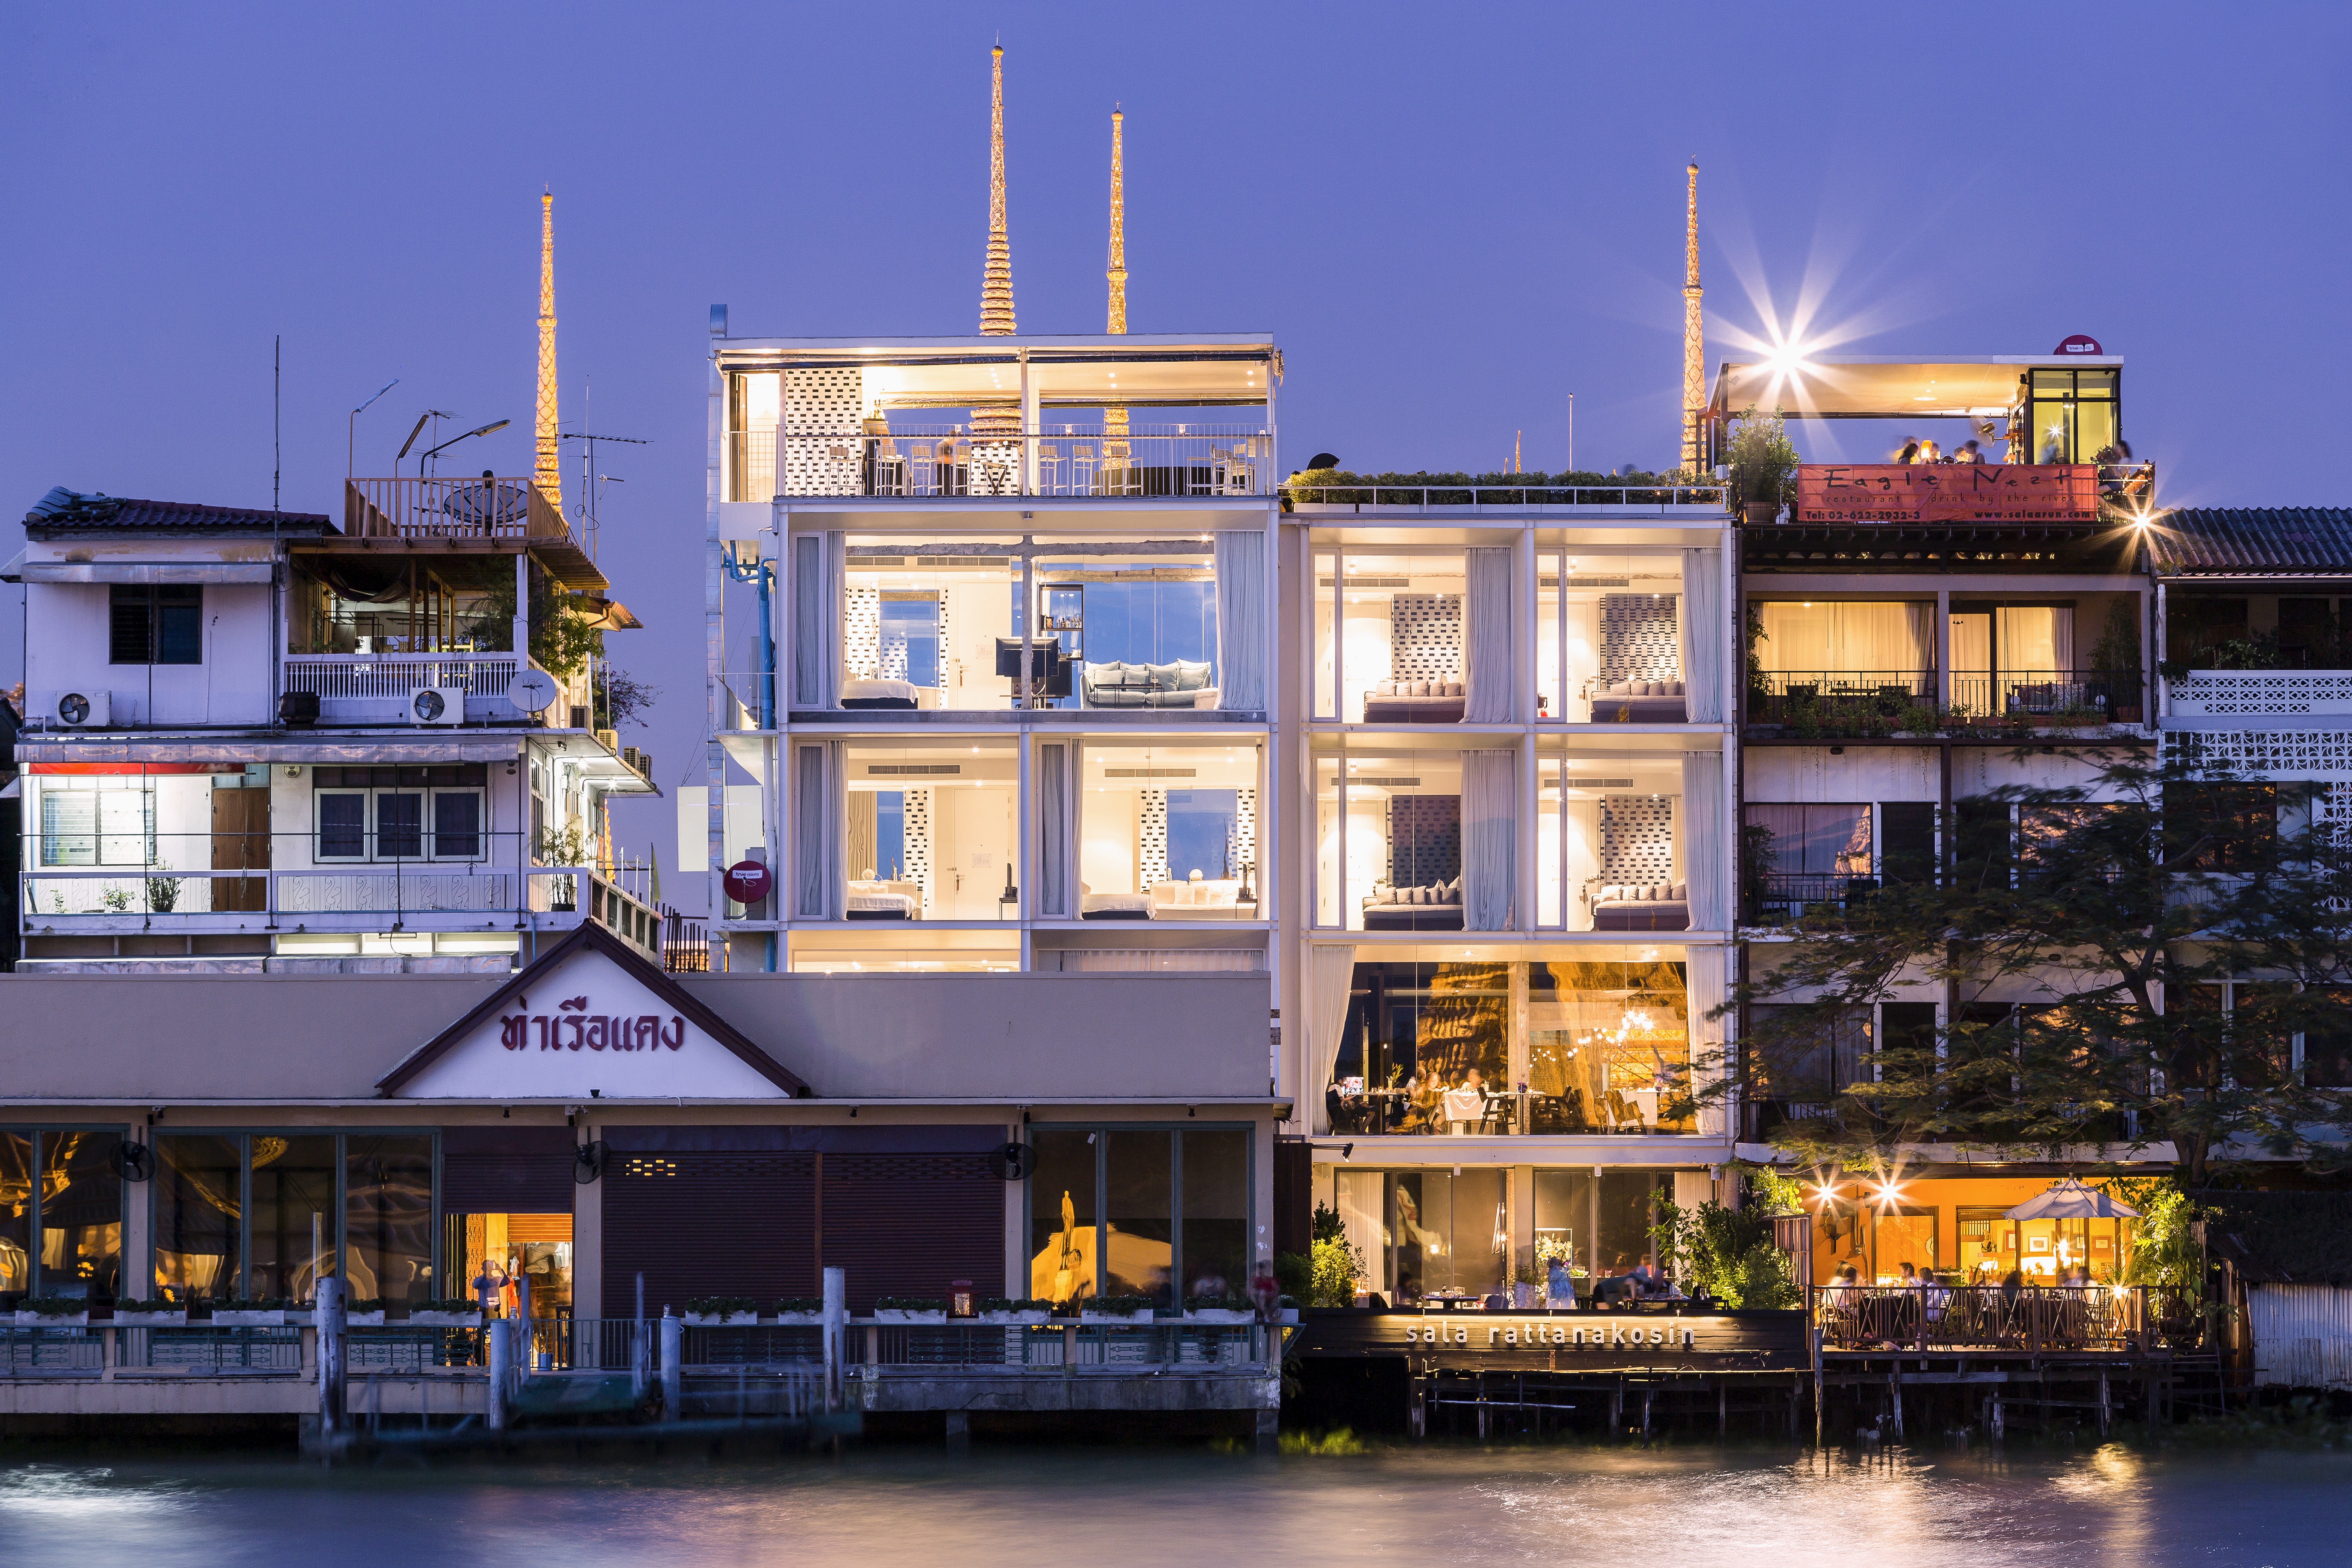 The hotel as viewed from the river. Photo: Sala Rattanakosin